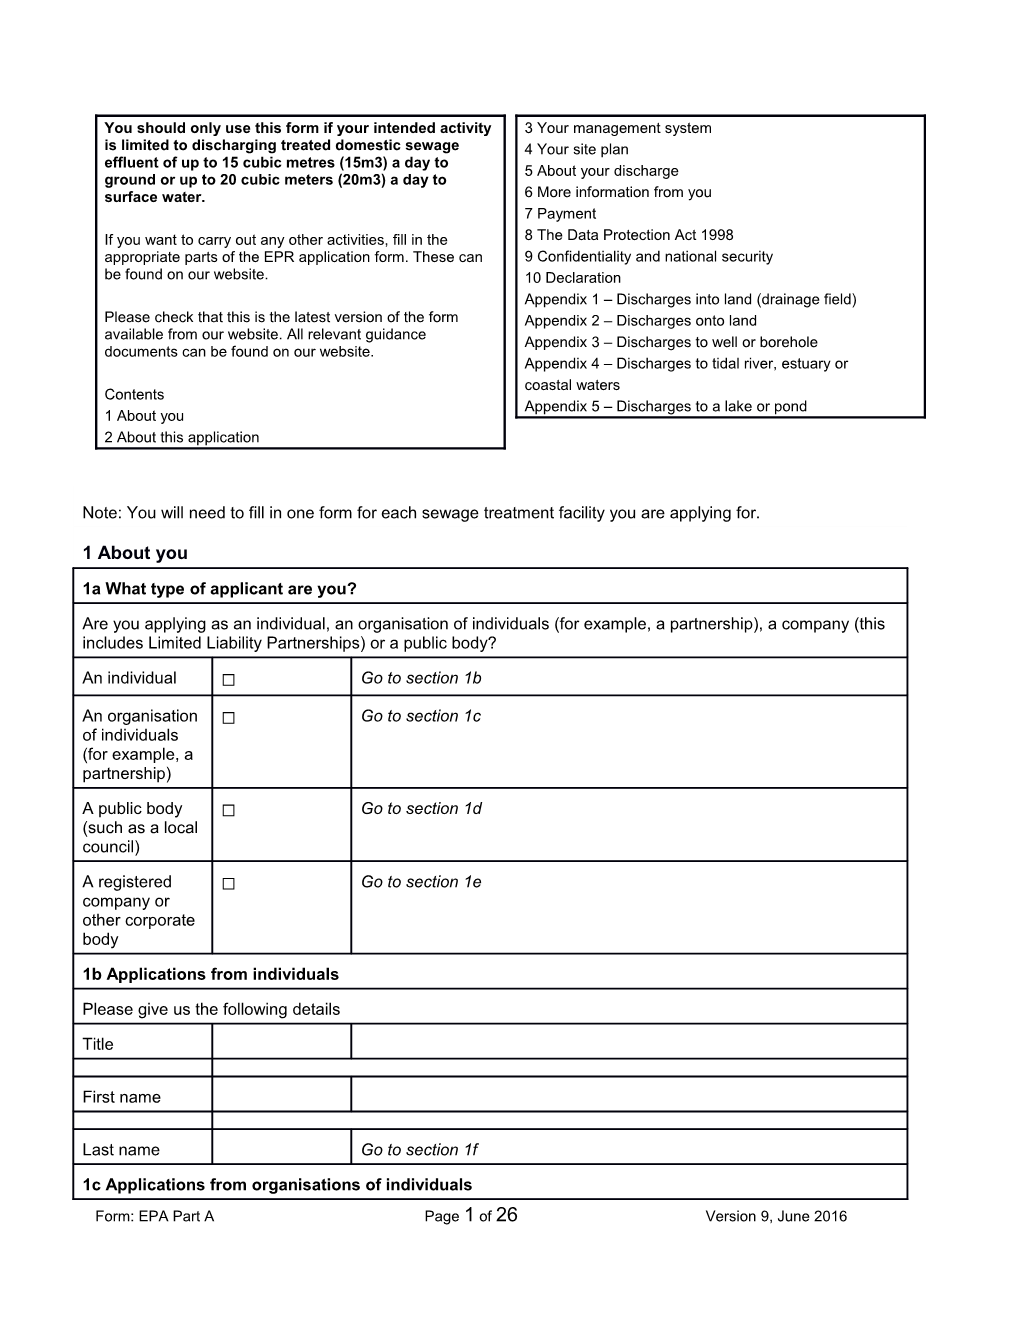 You Should Only Use This Form If Your Intended Activity Is Limited to Discharging Treated